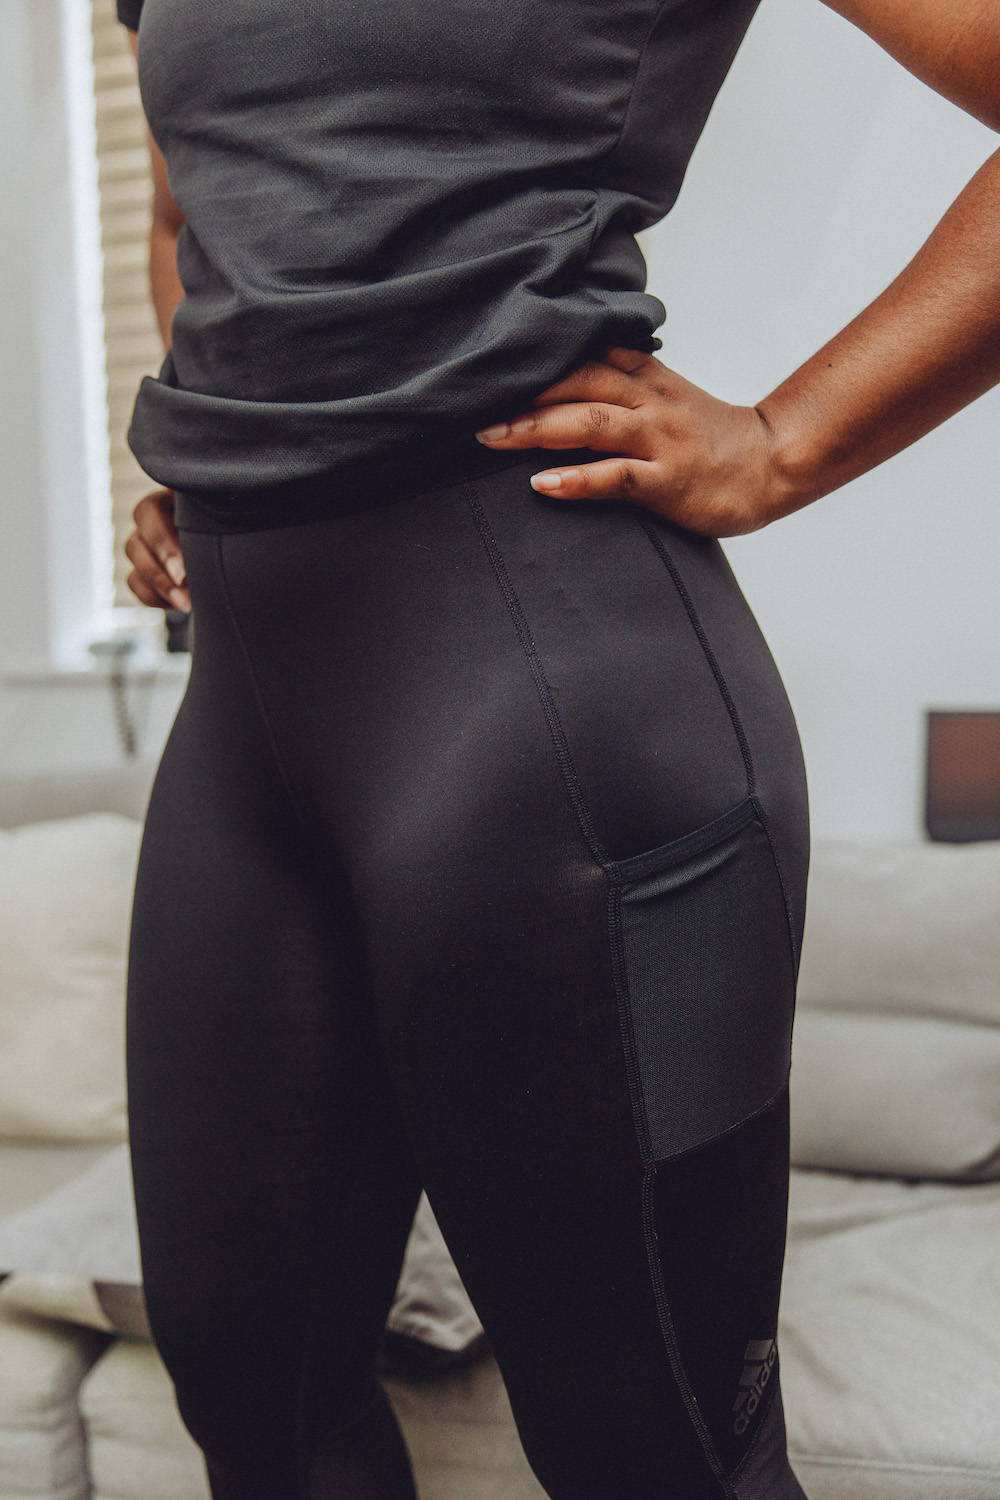 Adidas Techfit Period-Proof 7/8 Leggings for Running On Your Period